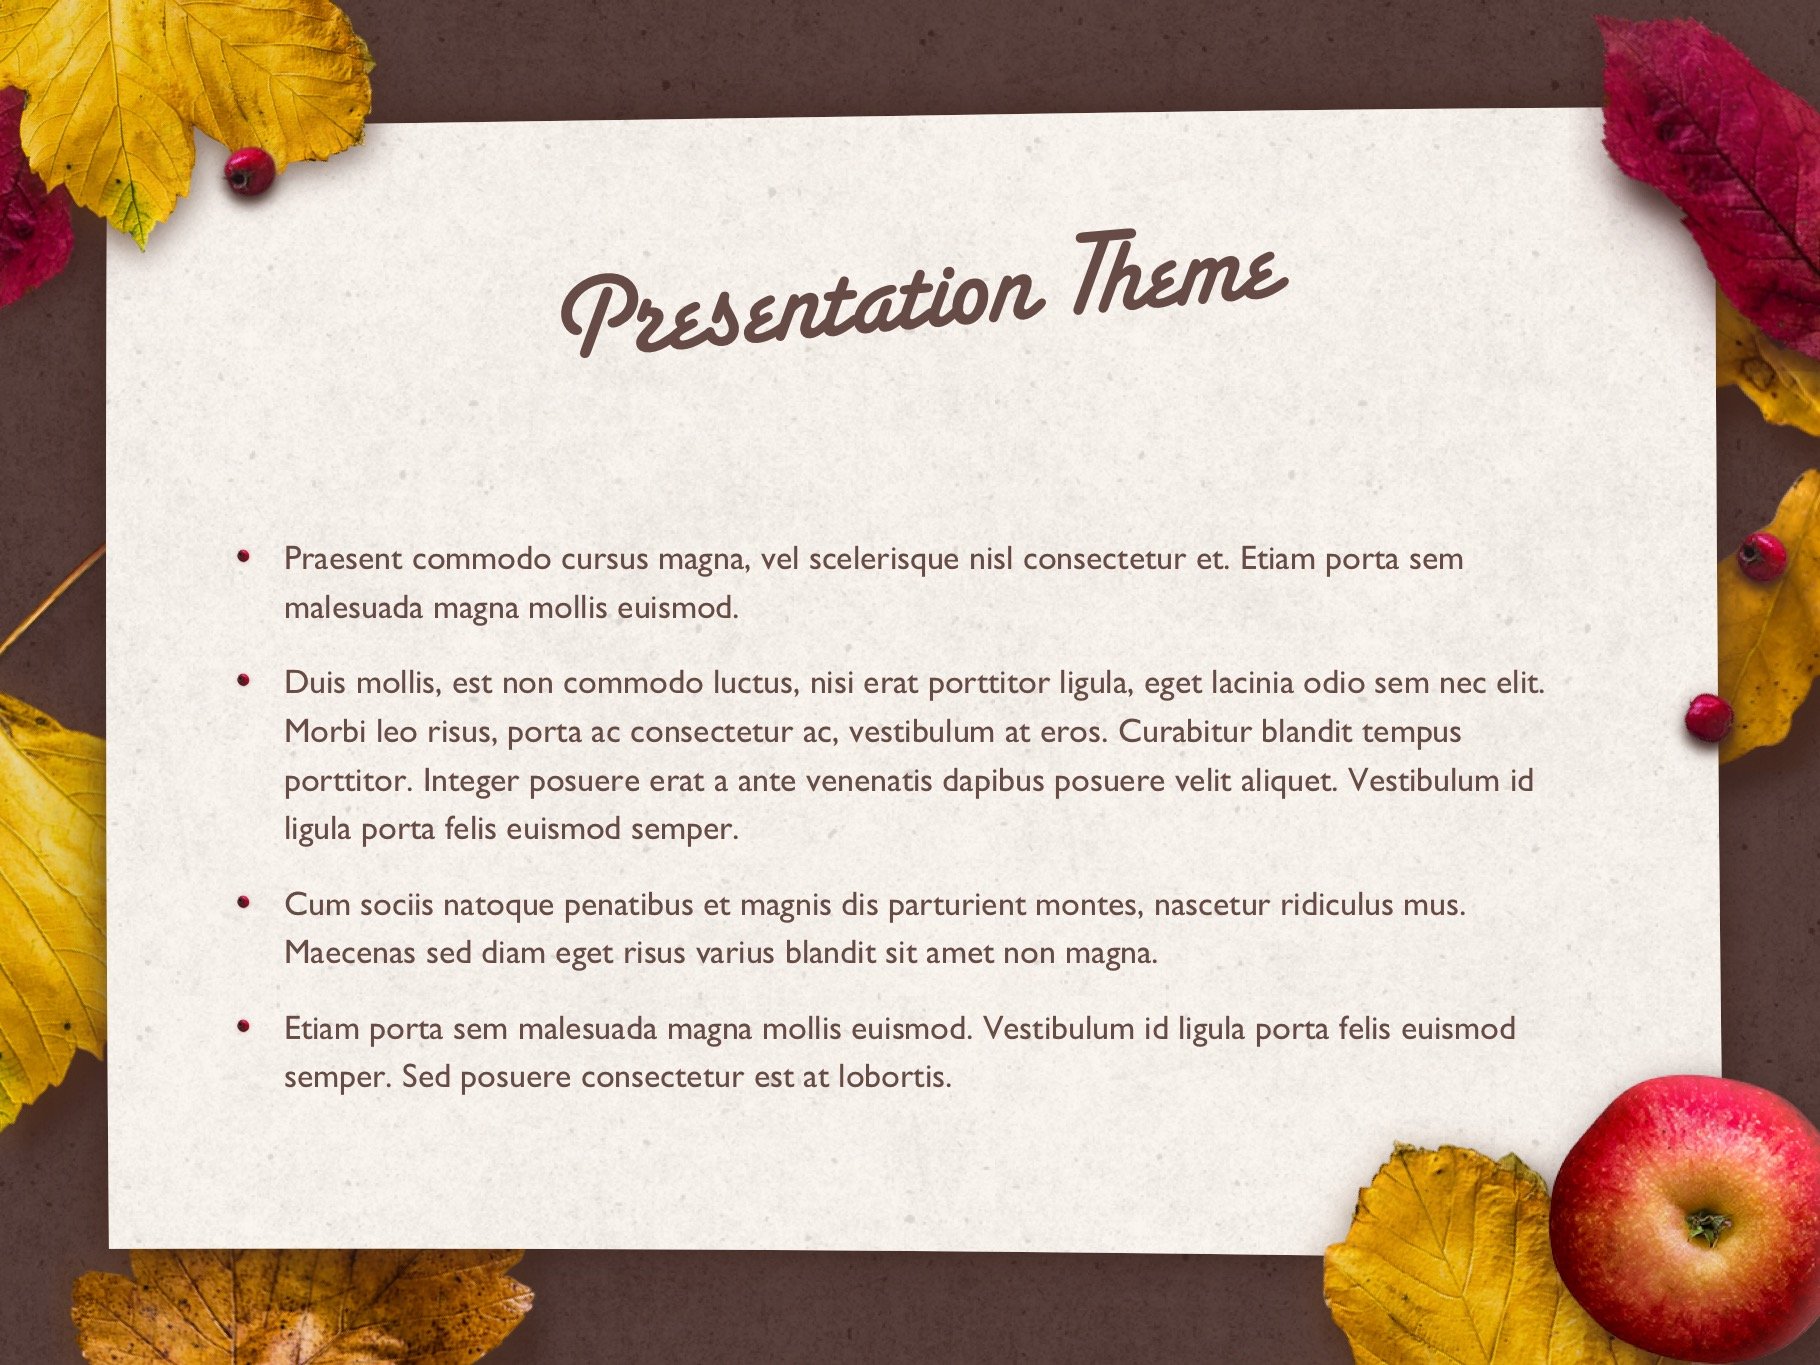 The main fall elements for autumn presentation.